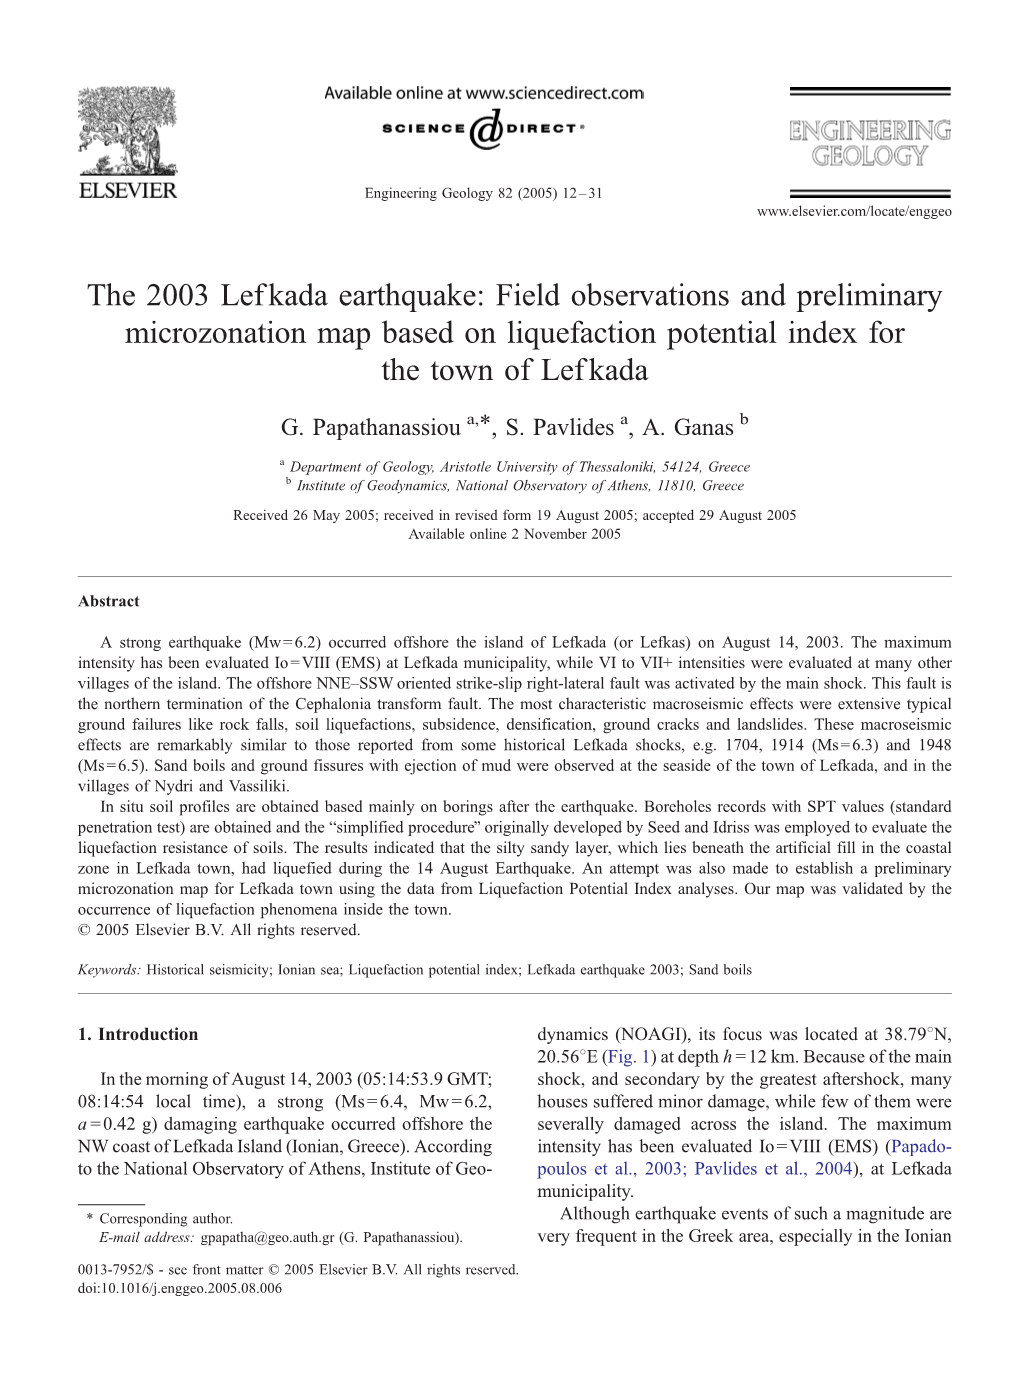 The 2003 Lefkada Earthquake: Field Observations and Preliminary